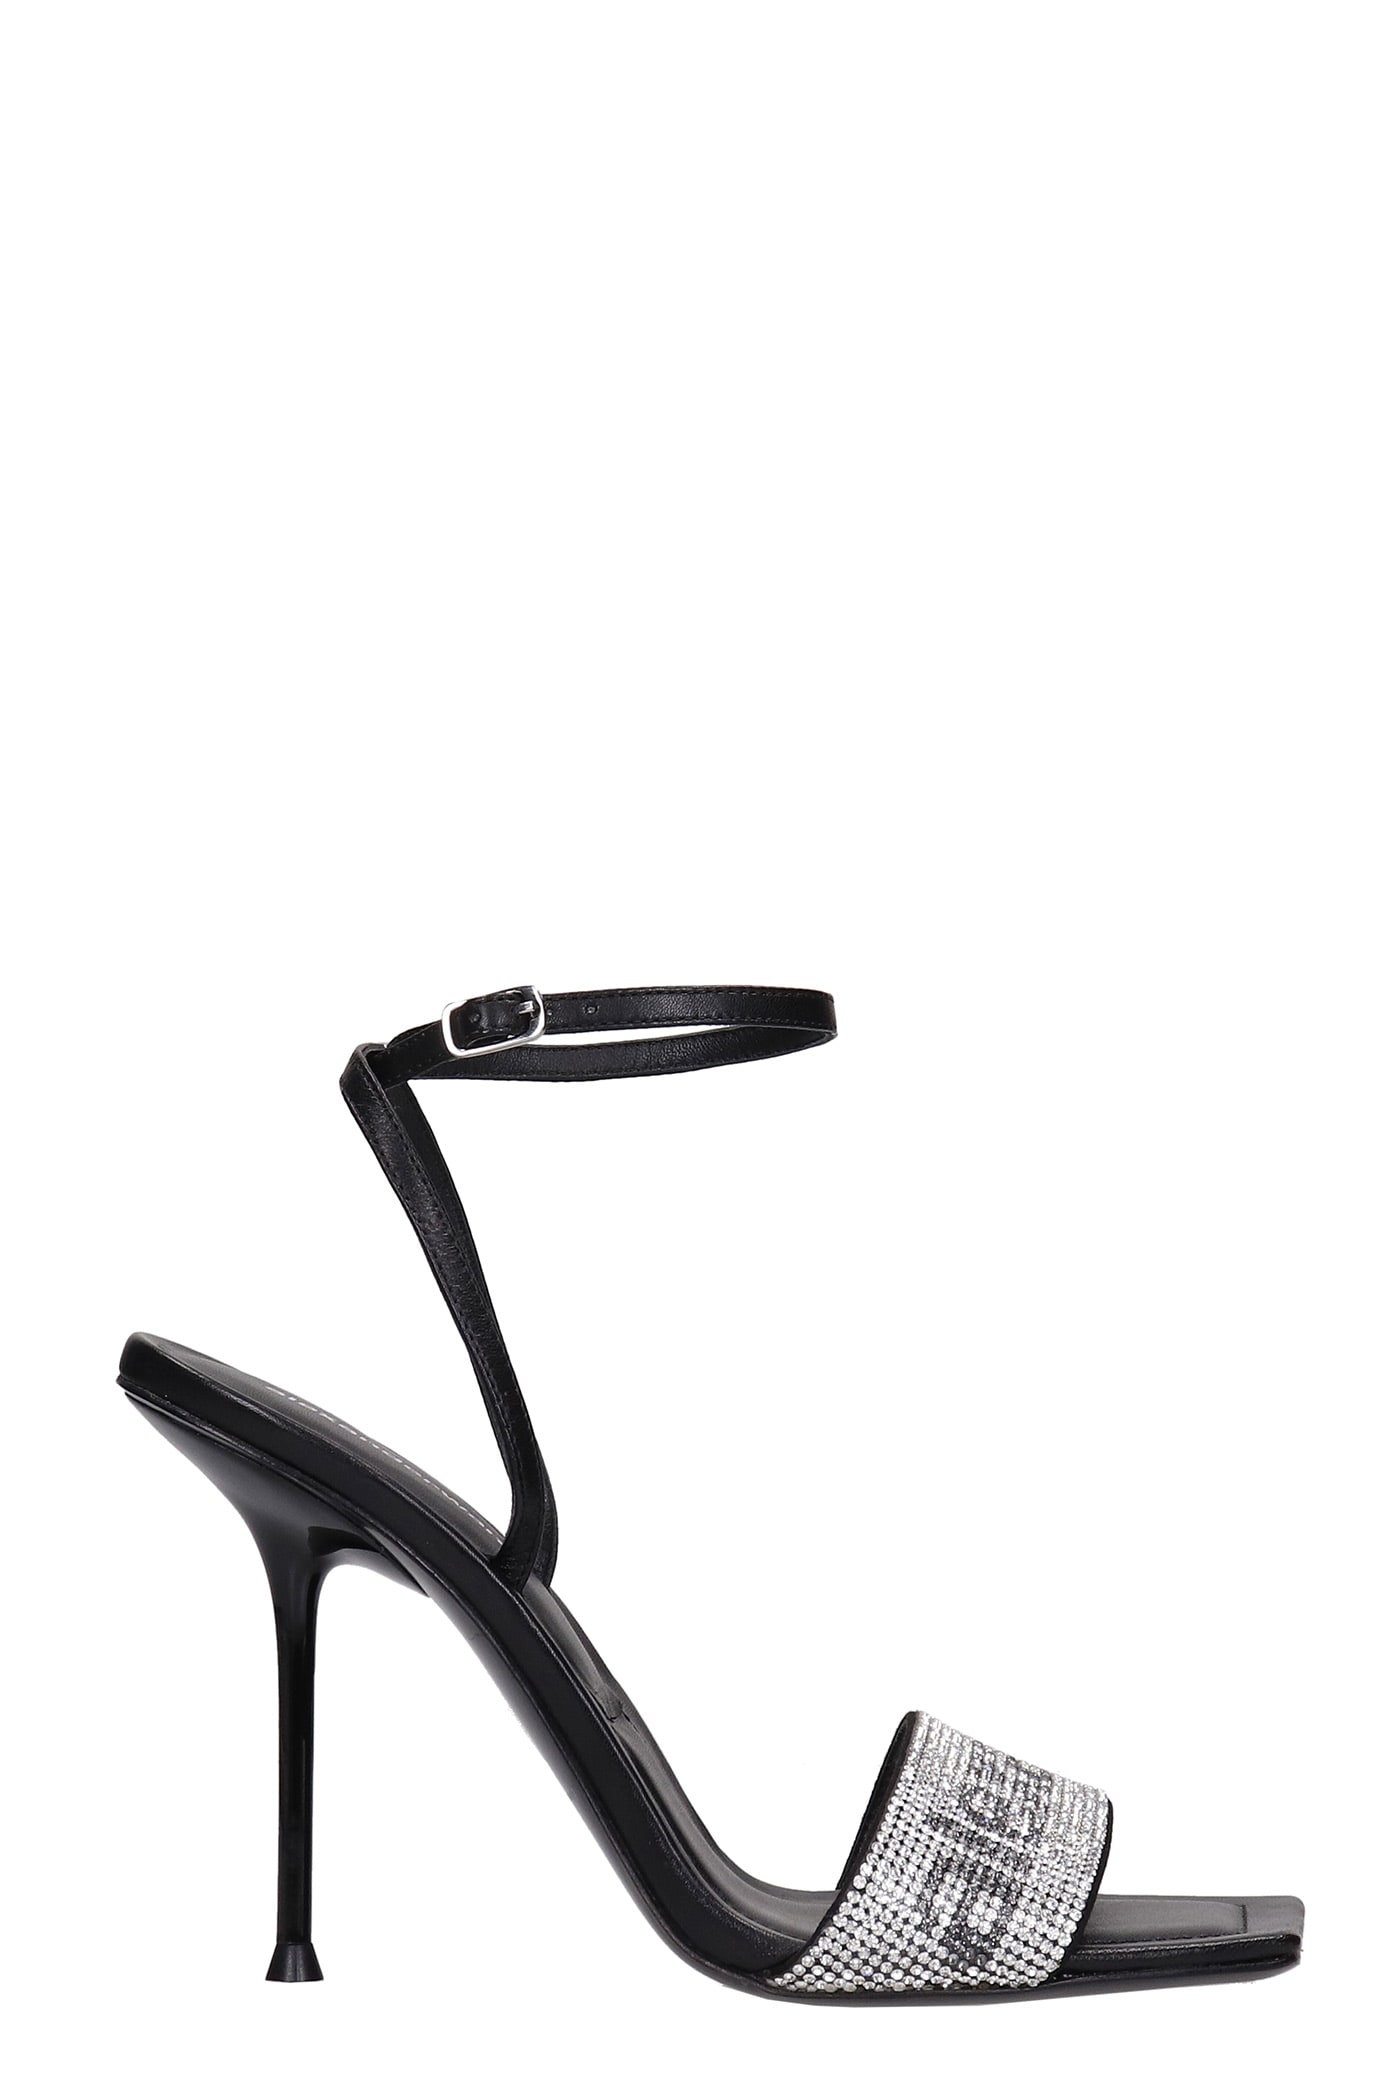 Buy Alexander Wang Julie Sandals In Black Leather online, shop Alexander Wang shoes with free shipping